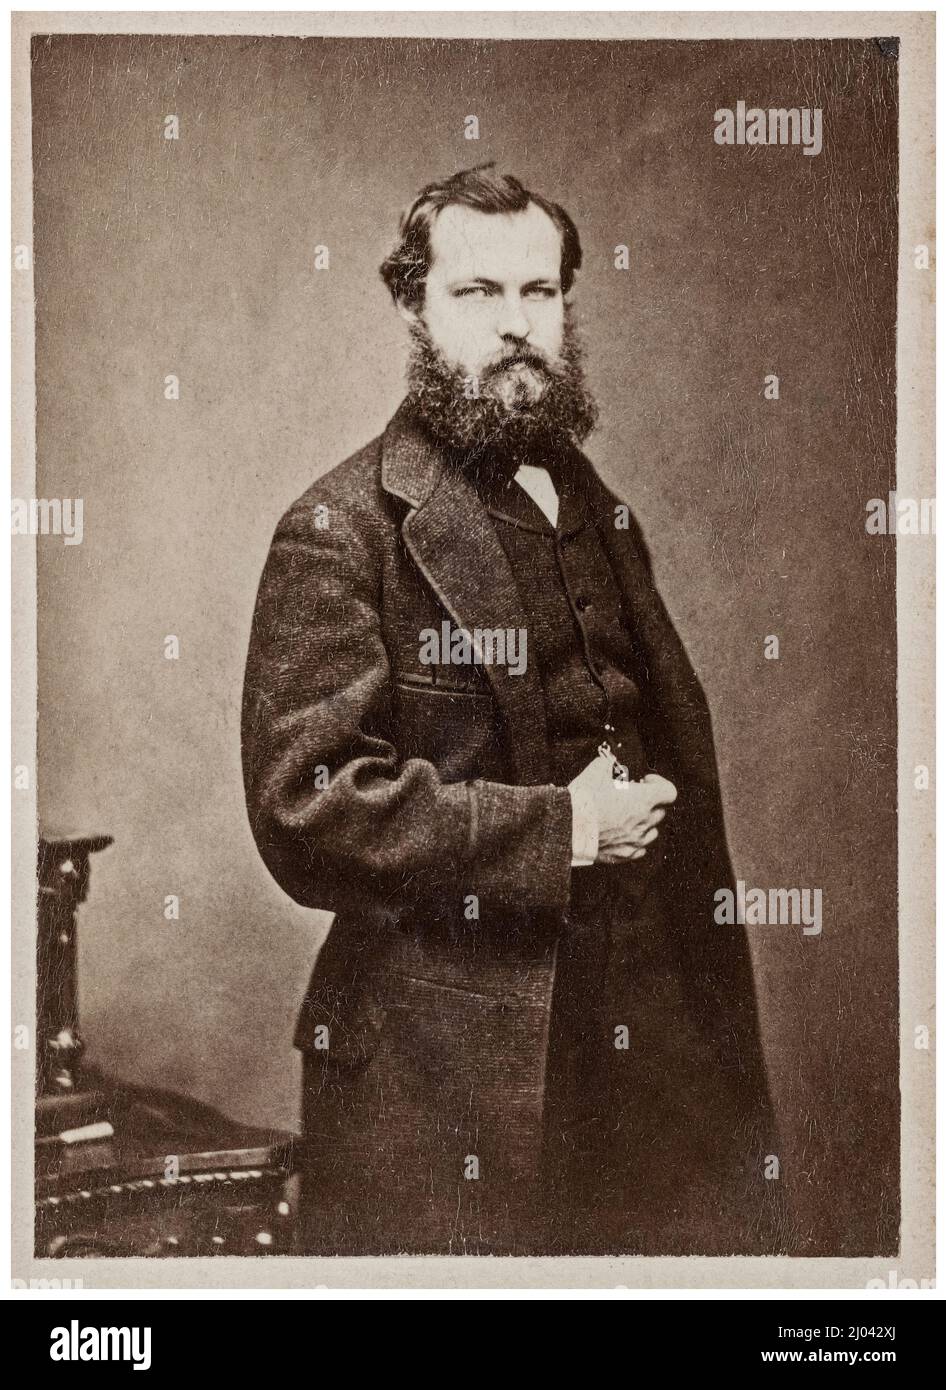 Prince Philippe of Orléans (1838-1894), Count of Paris, disputedly King of the French for two days from 24th to 26th February 1848 as Louis Philippe II, portrait photograph, 1860-1890 Stock Photo